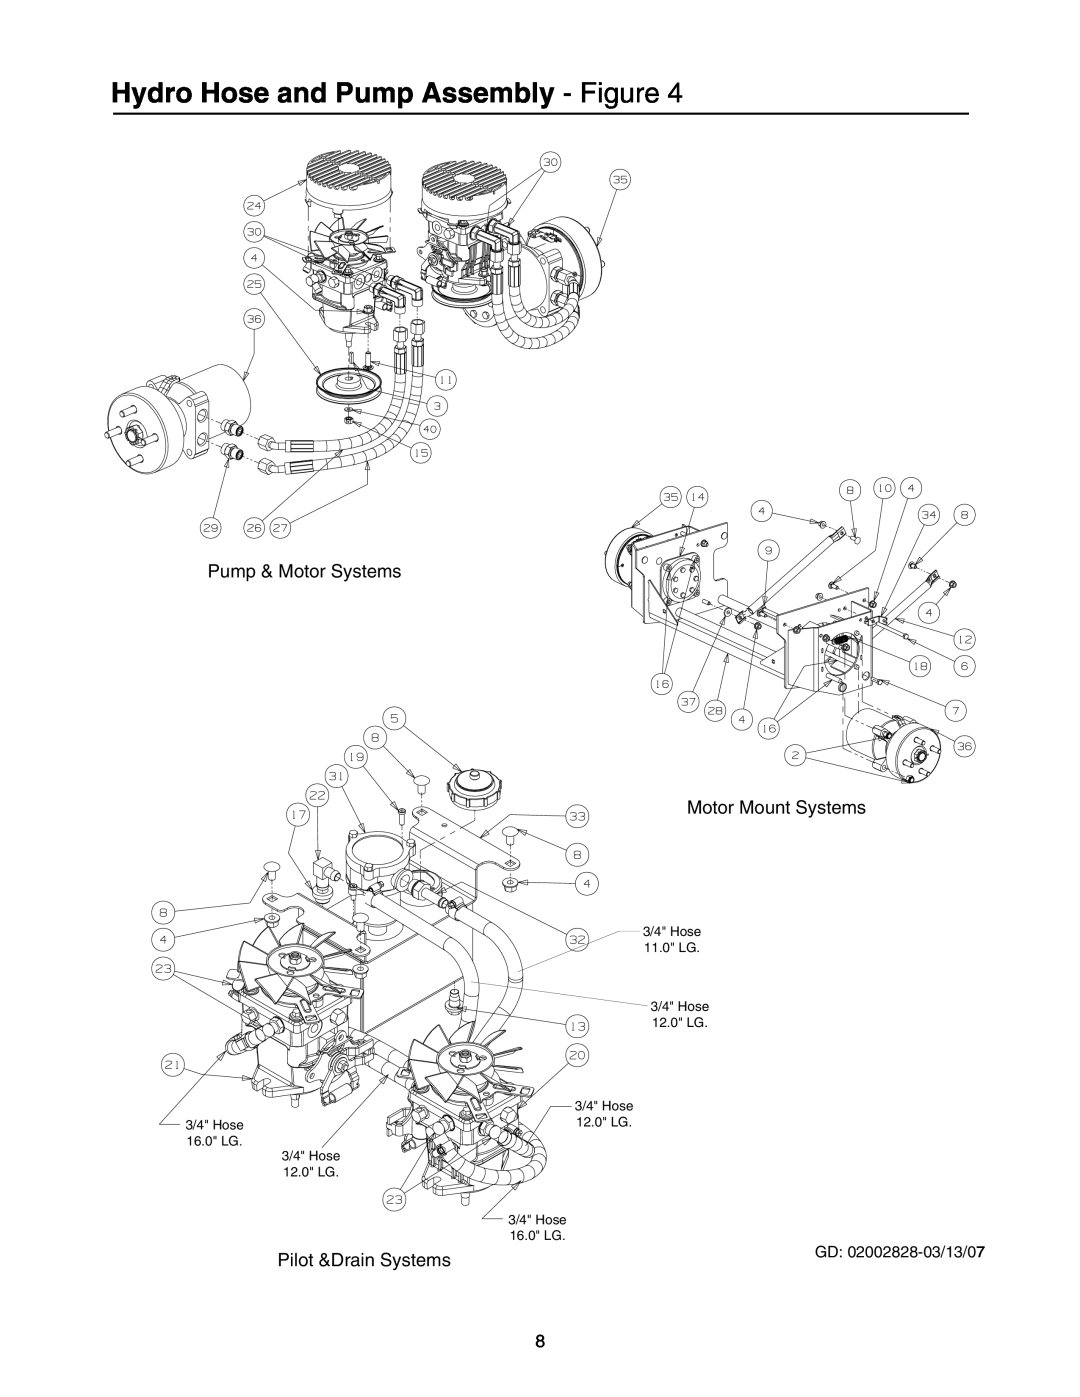 Cub Cadet 53AI8CTW750 manual Hydro Hose and Pump Assembly - Figure, Pump & Motor Systems, Pilot &Drain Systems 